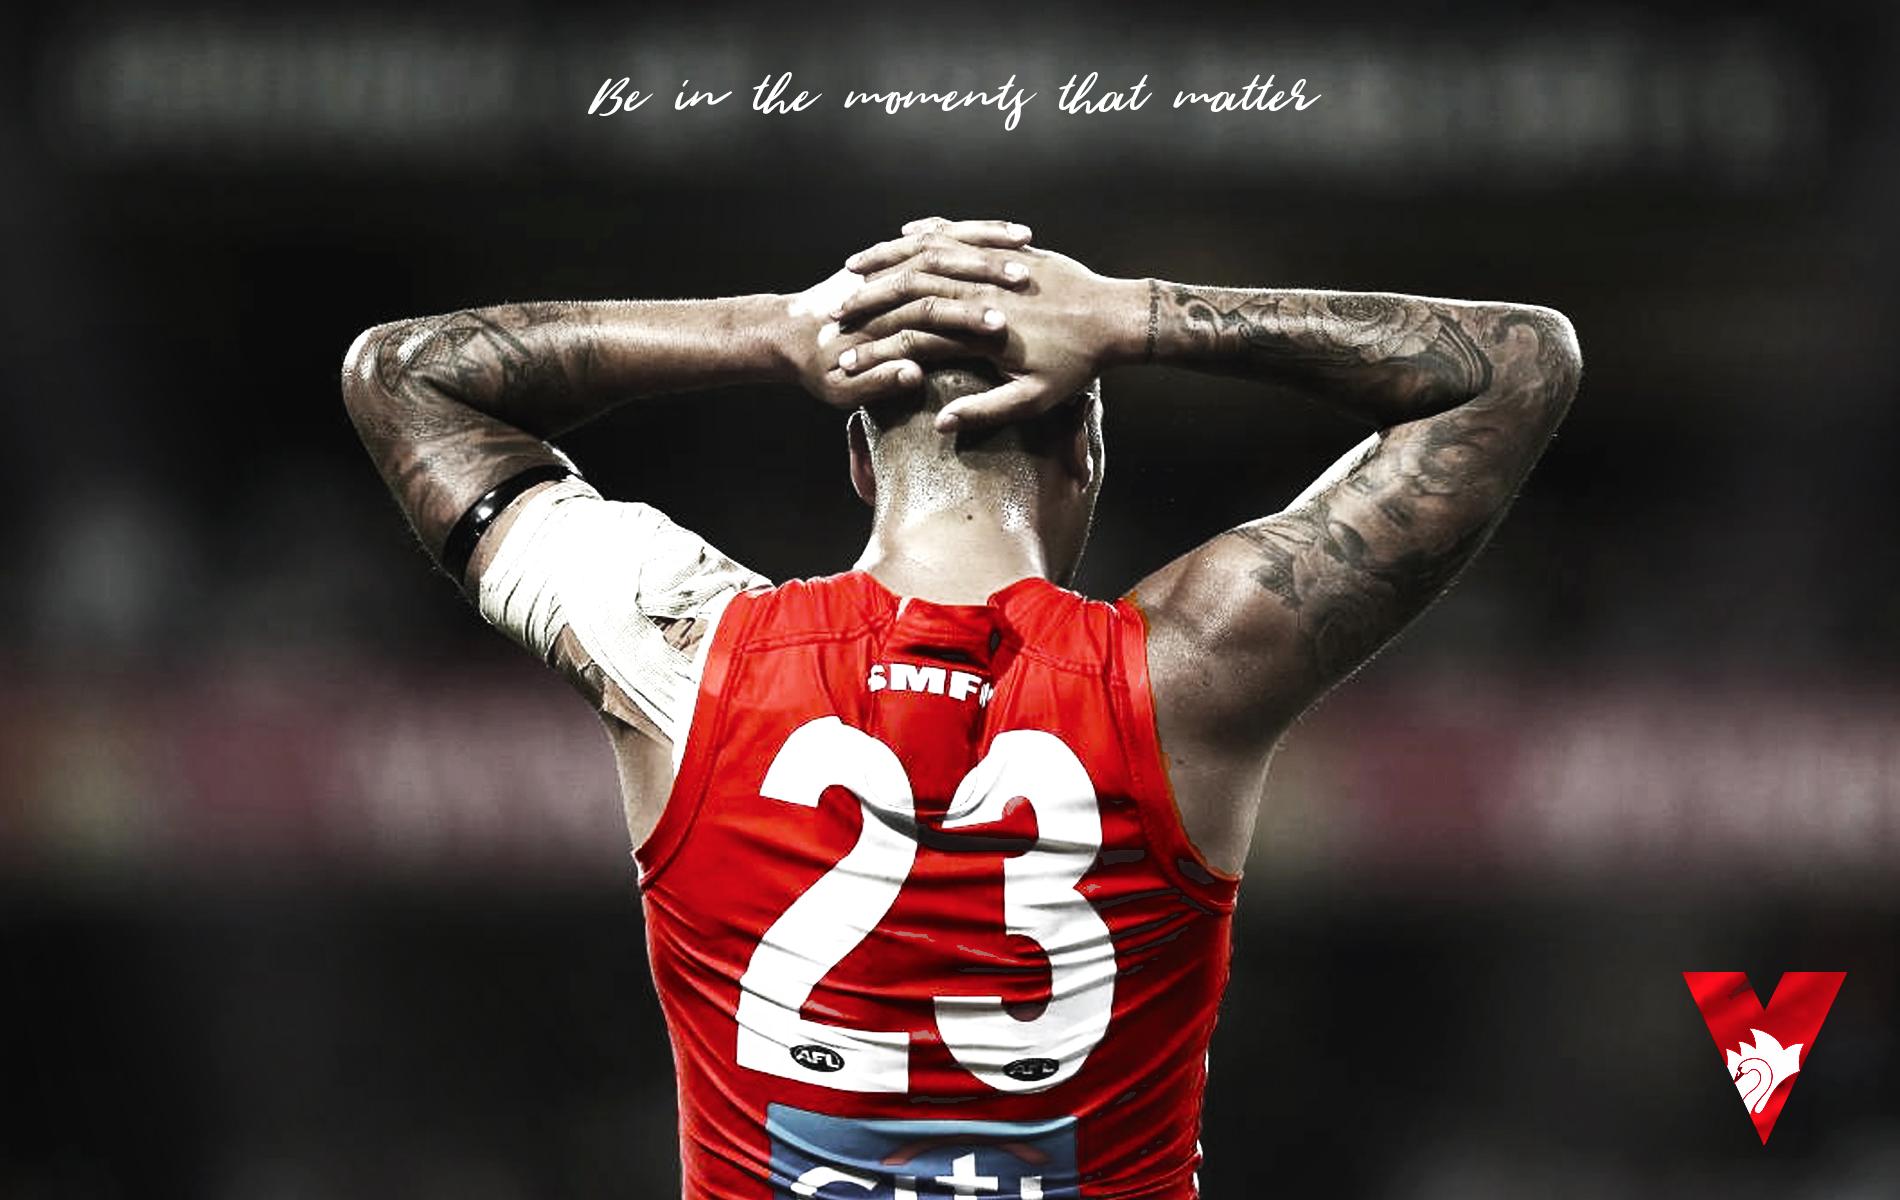 Best Afl Wallpapers For Desktop of all time Check it out now 